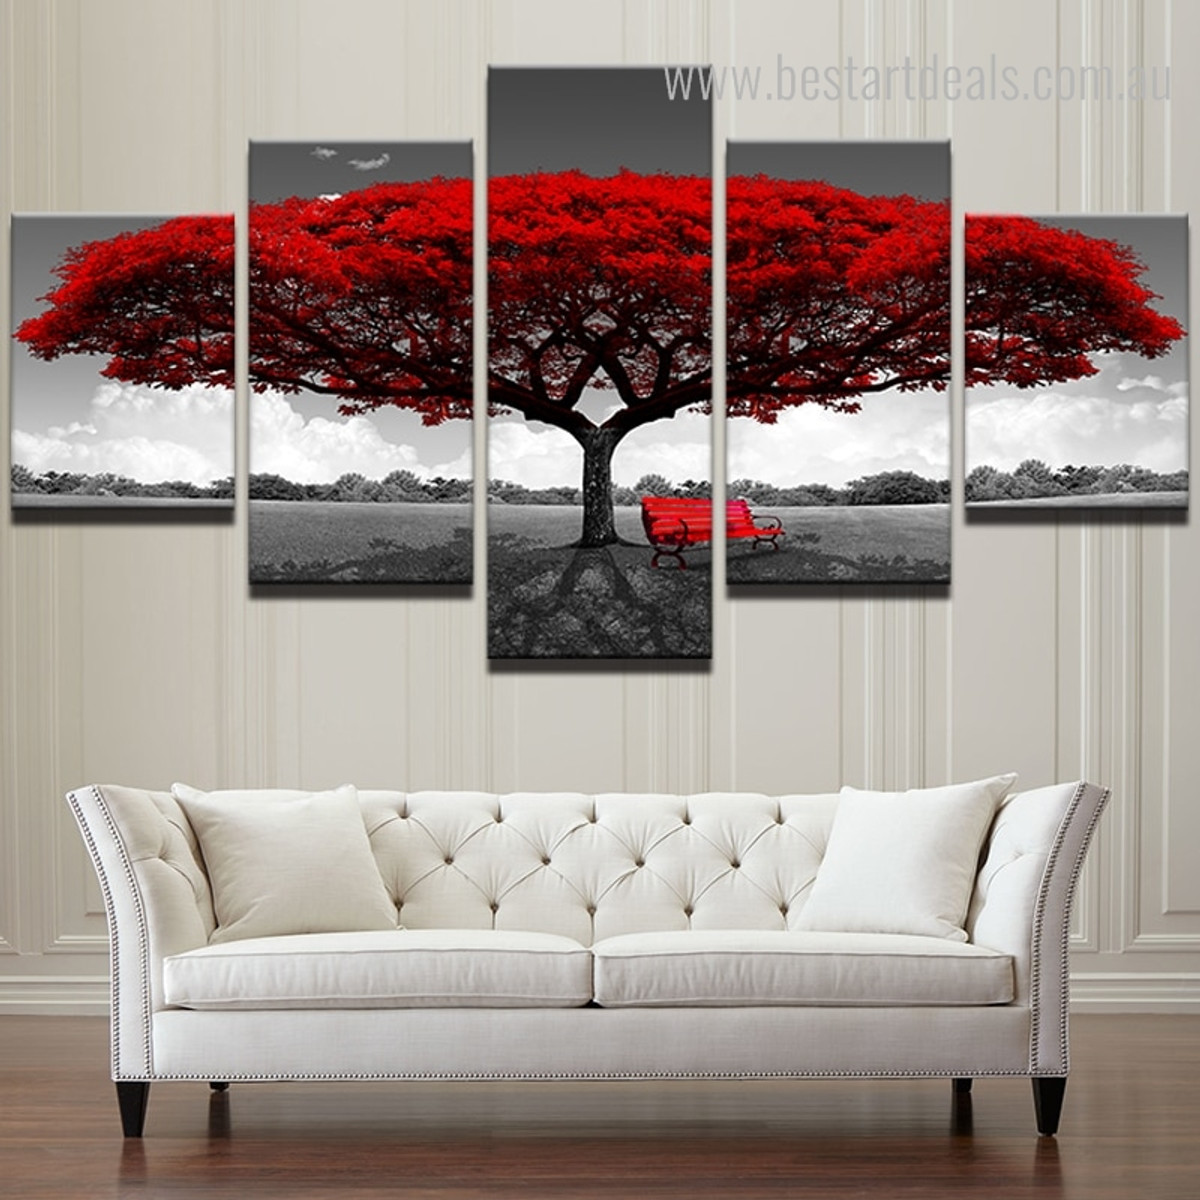 Red Arbor Nature Botanical Contemporary Framed Artwork Picture Canvas Print for Room Wall Flourish